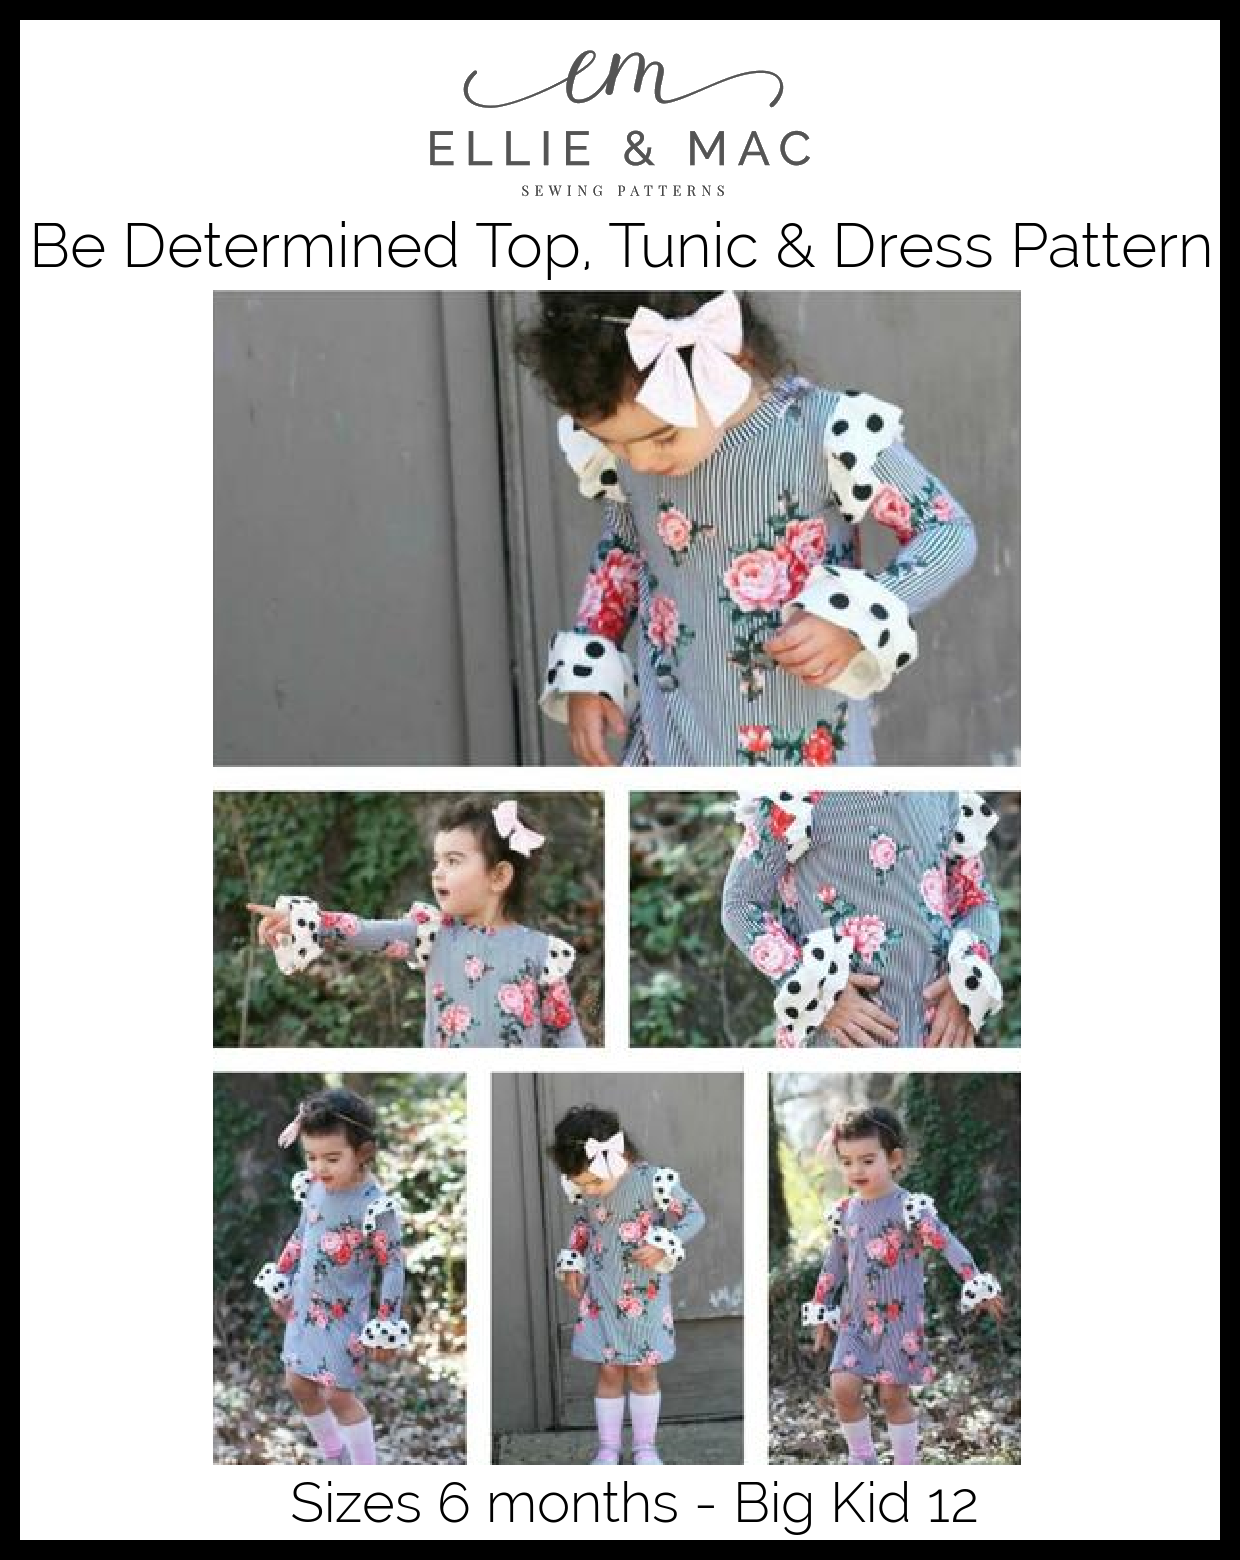 Be Determined Top, Tunic & Dress Pattern